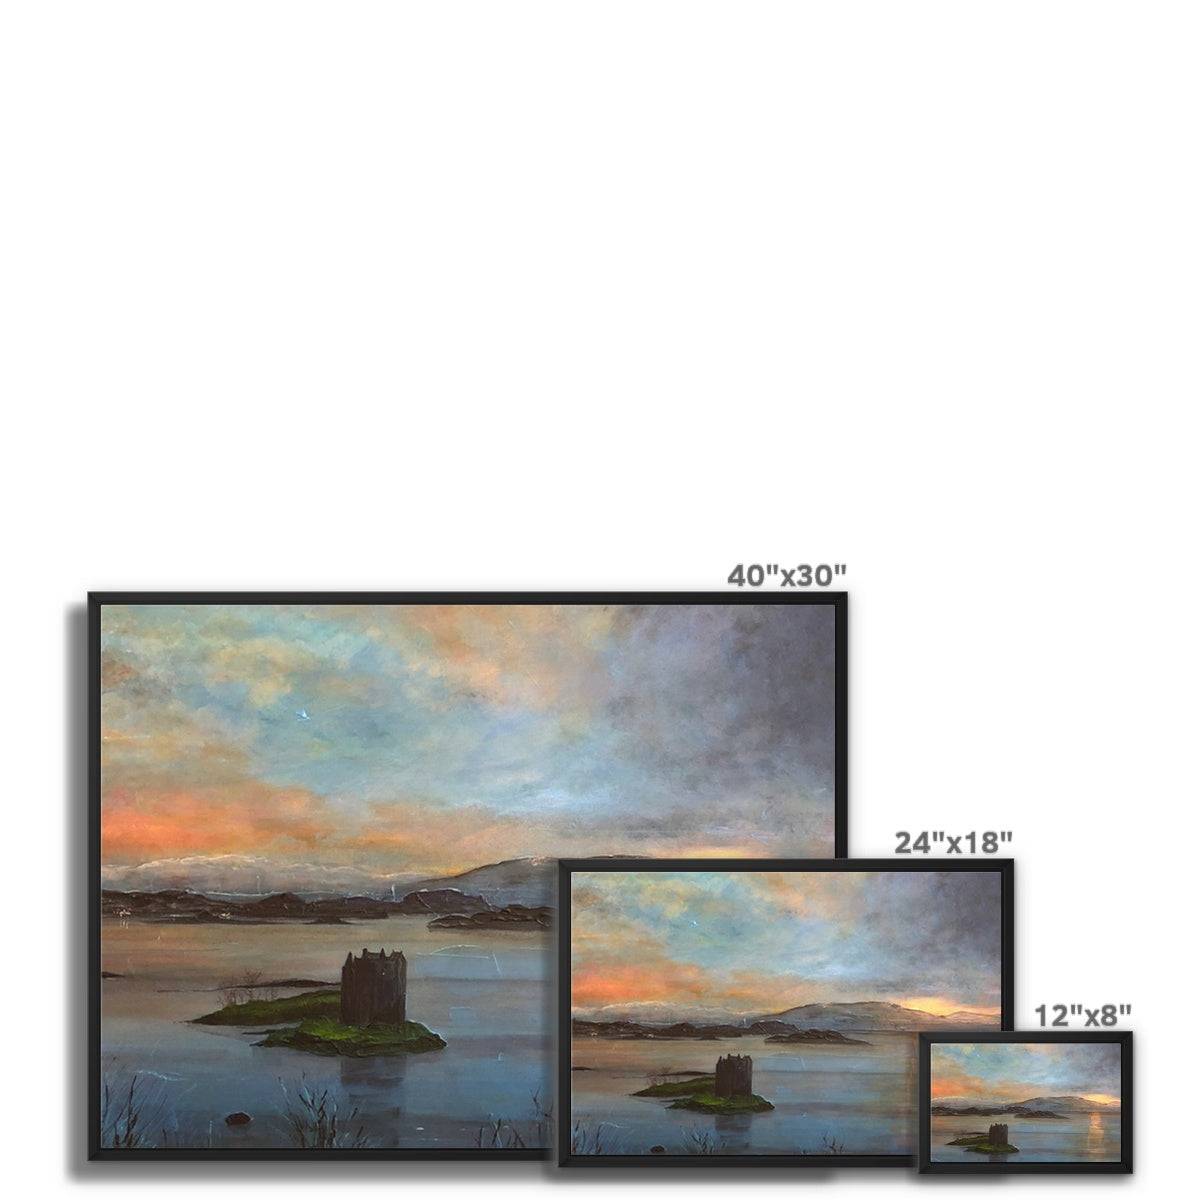 Castle Stalker Twilight Painting | Framed Canvas From Scotland-Floating Framed Canvas Prints-Historic & Iconic Scotland Art Gallery-Paintings, Prints, Homeware, Art Gifts From Scotland By Scottish Artist Kevin Hunter